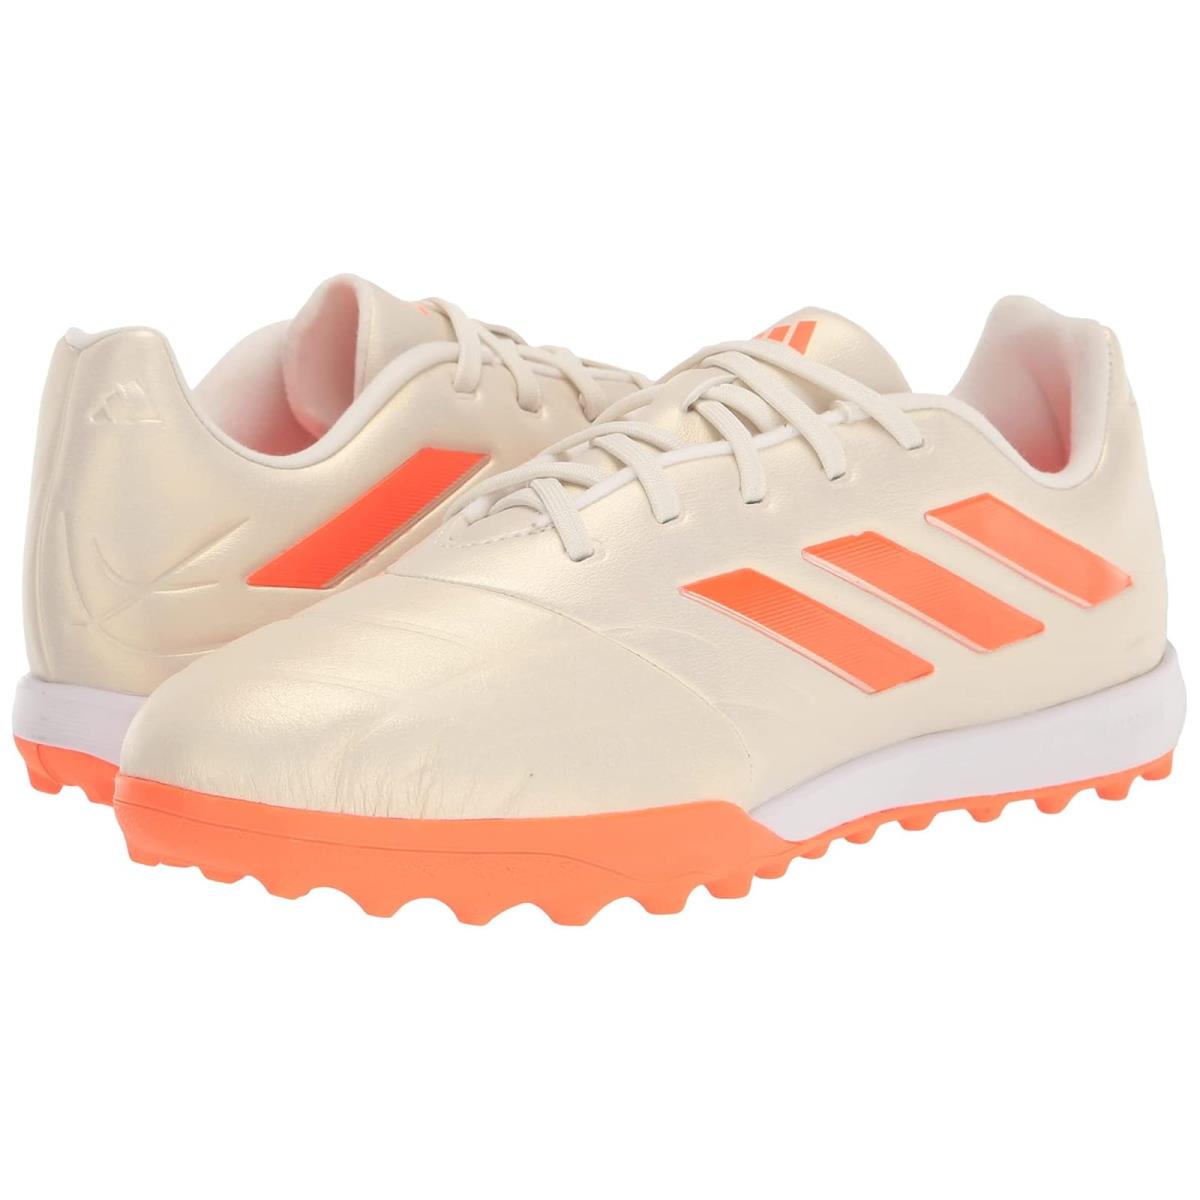 Unisex Sneakers Athletic Shoes Adidas Copa Pure.3 Turf Off-White/Team Solar Orange/Off-White